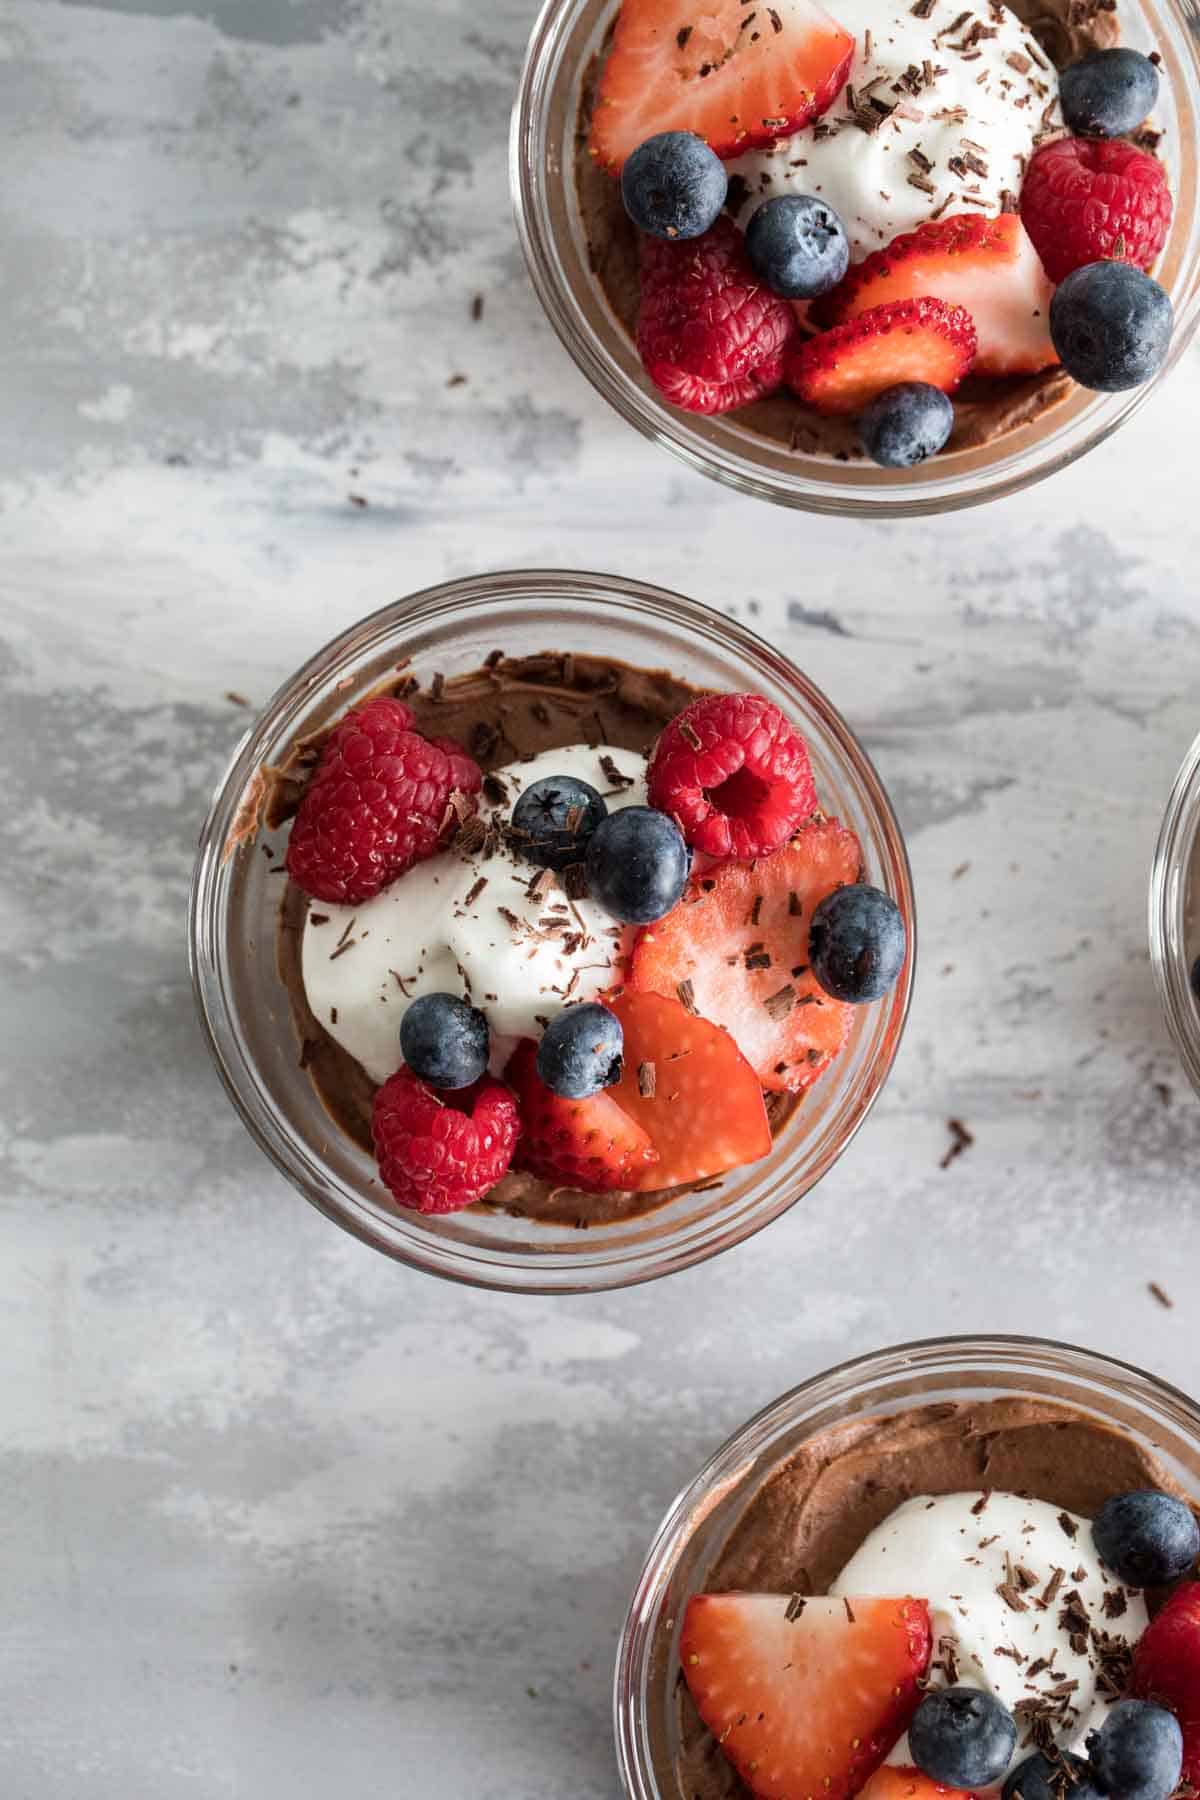 Bowls of Chocolate Mousse with Berries.